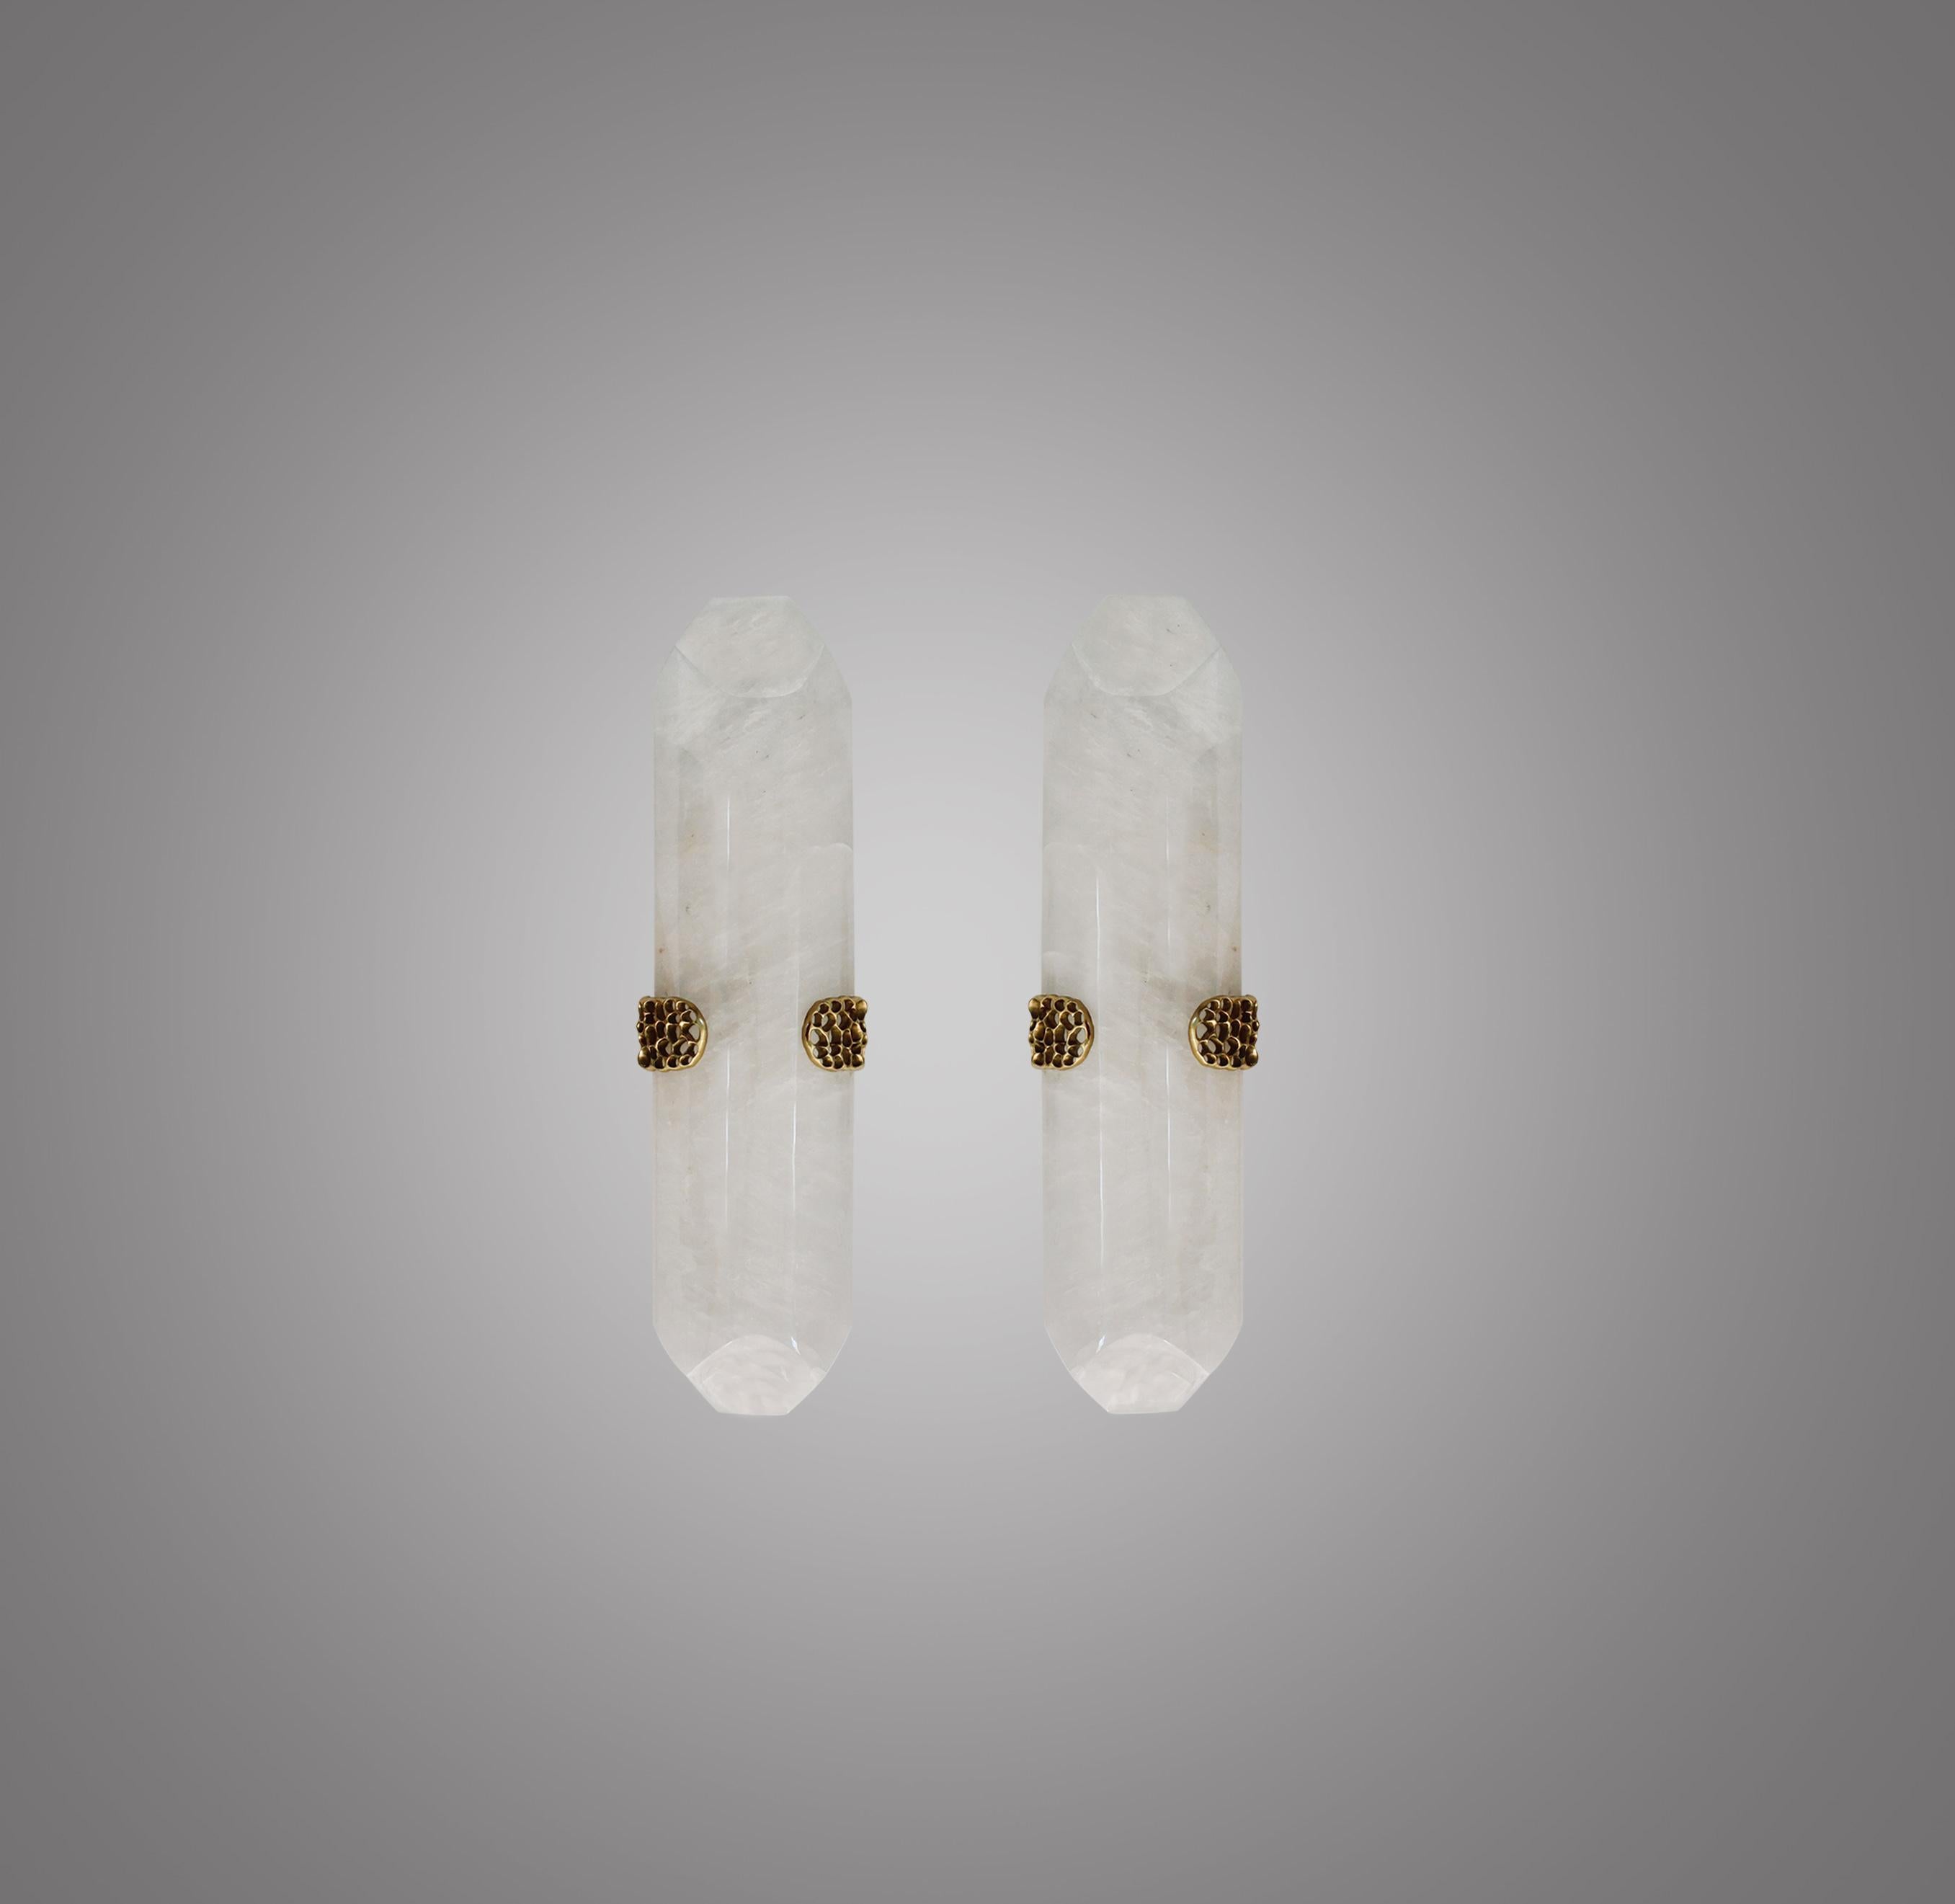 TDW22 rock crystal sconces with polish brass decoration. Created by Phoenix Gallery, NYC.
Each sconce installs 2 sockets. 120watts max. Led light bulbs supplied.
Custom size and metal finish upon request.